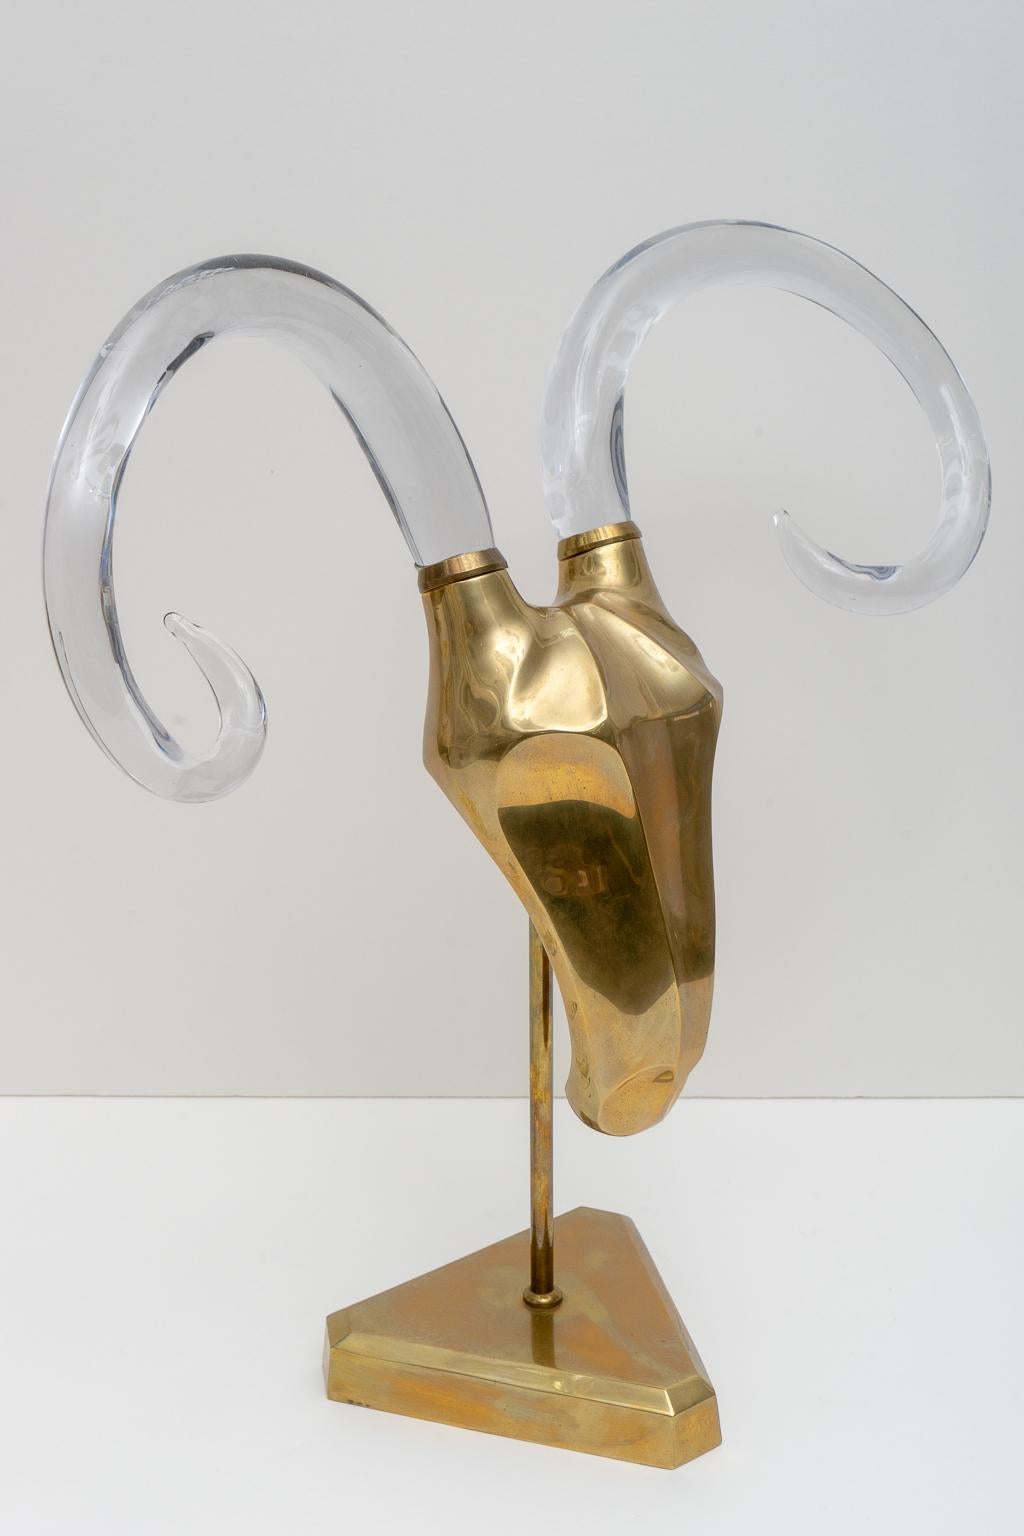 This stylish and chic figure of a stylized rams head is fabricated in brass and Murano Glass and was acquired from a Palm Beach estate. The piece is attributed to Karl Springer and dates to the late 1970s-1980s.